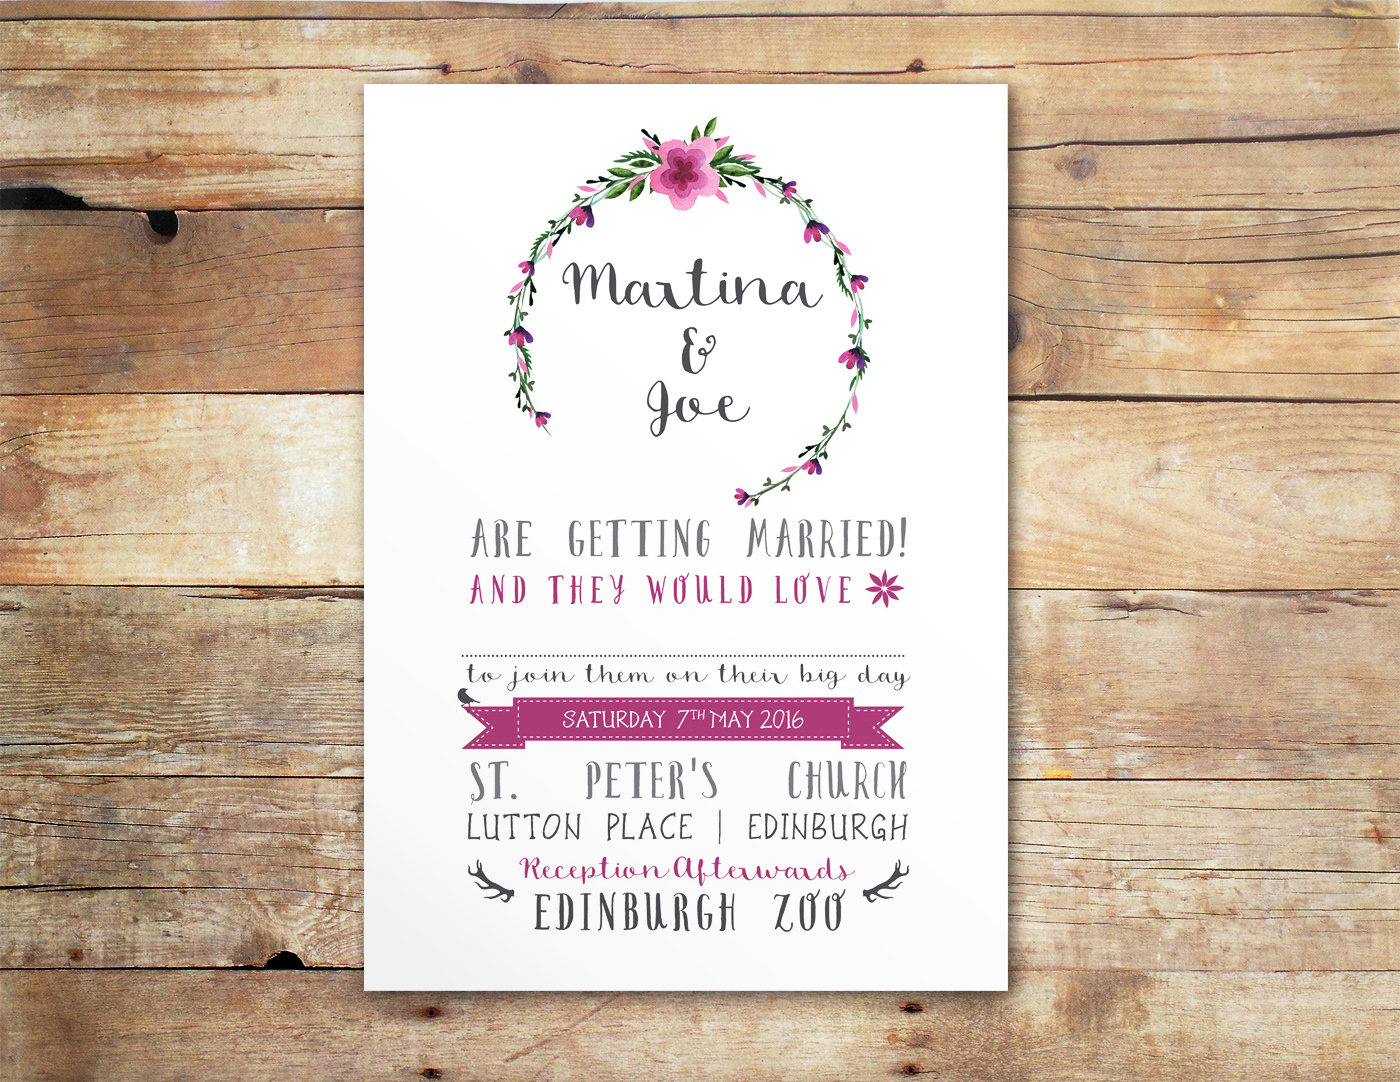 Country Chic Wedding Invitations Rustic Chic Floral Wedding Invitation Little Ivory Weddings